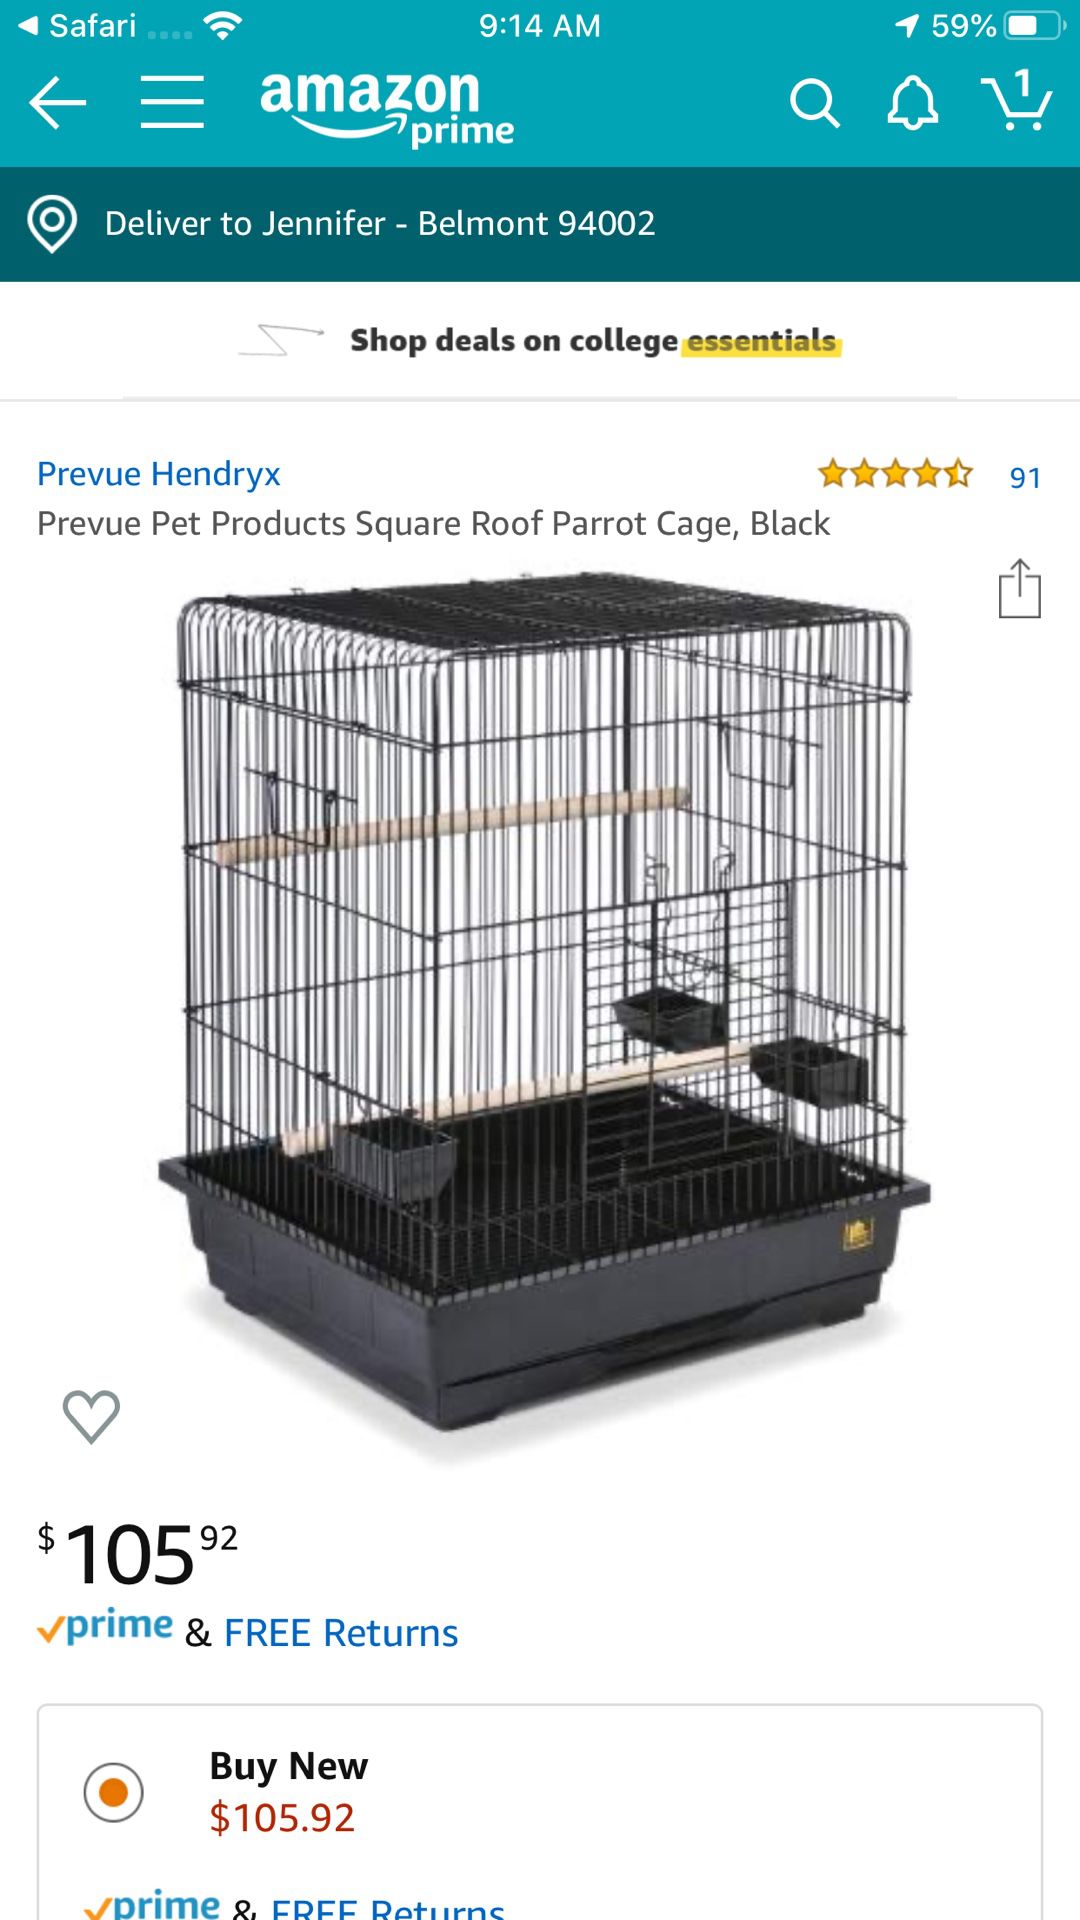 Bird cage great deal!